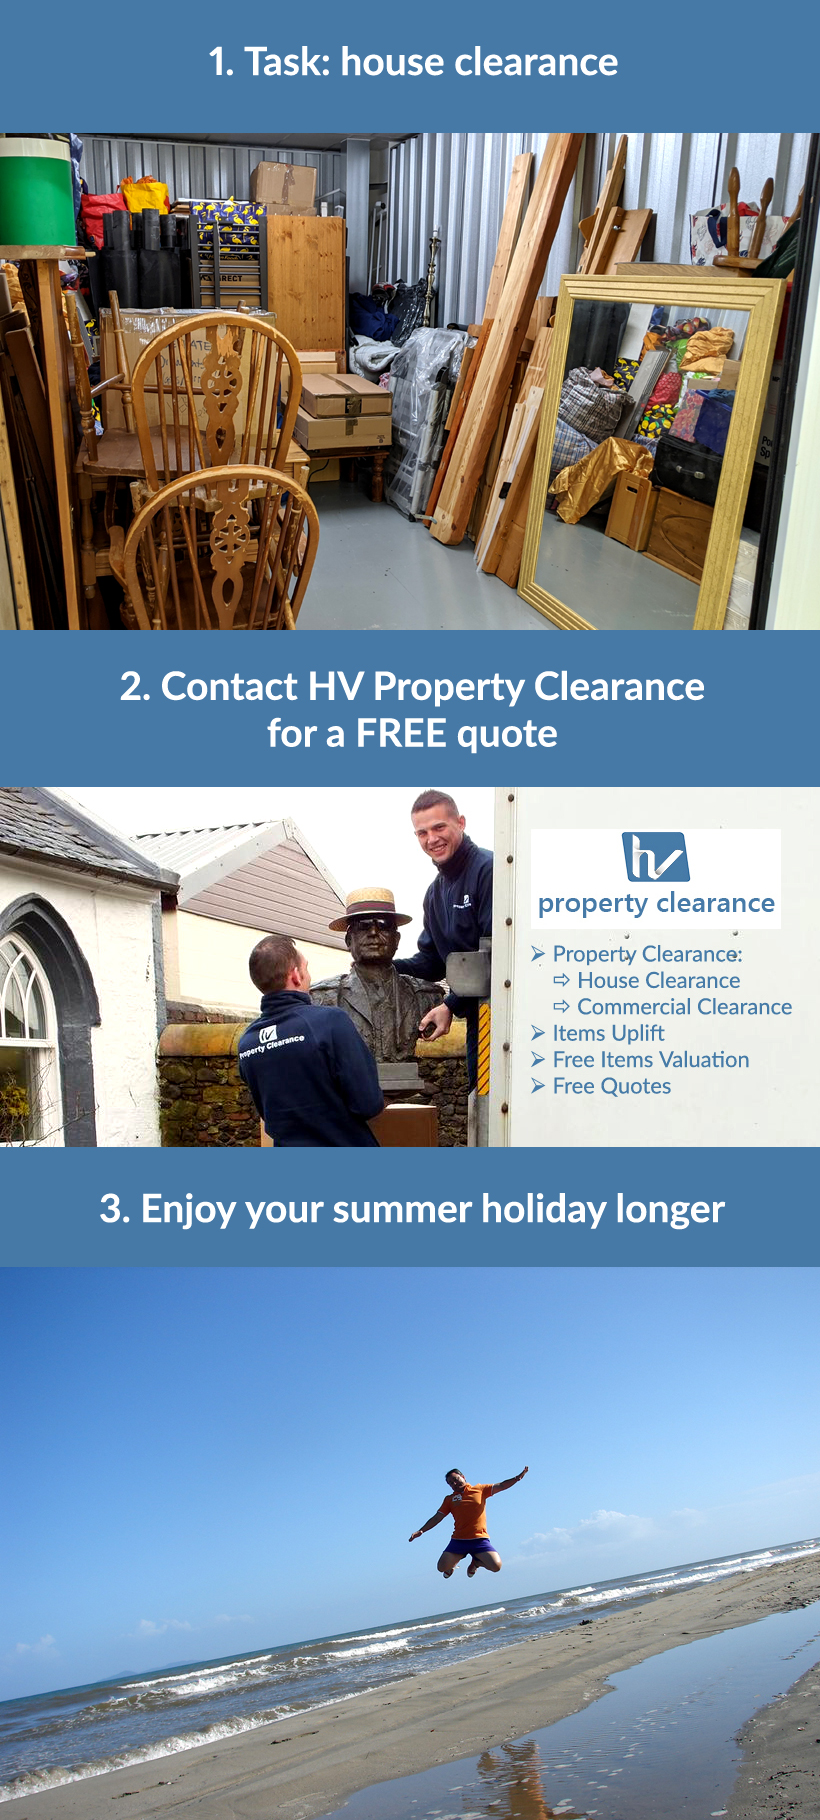 Property clearance during the summertime